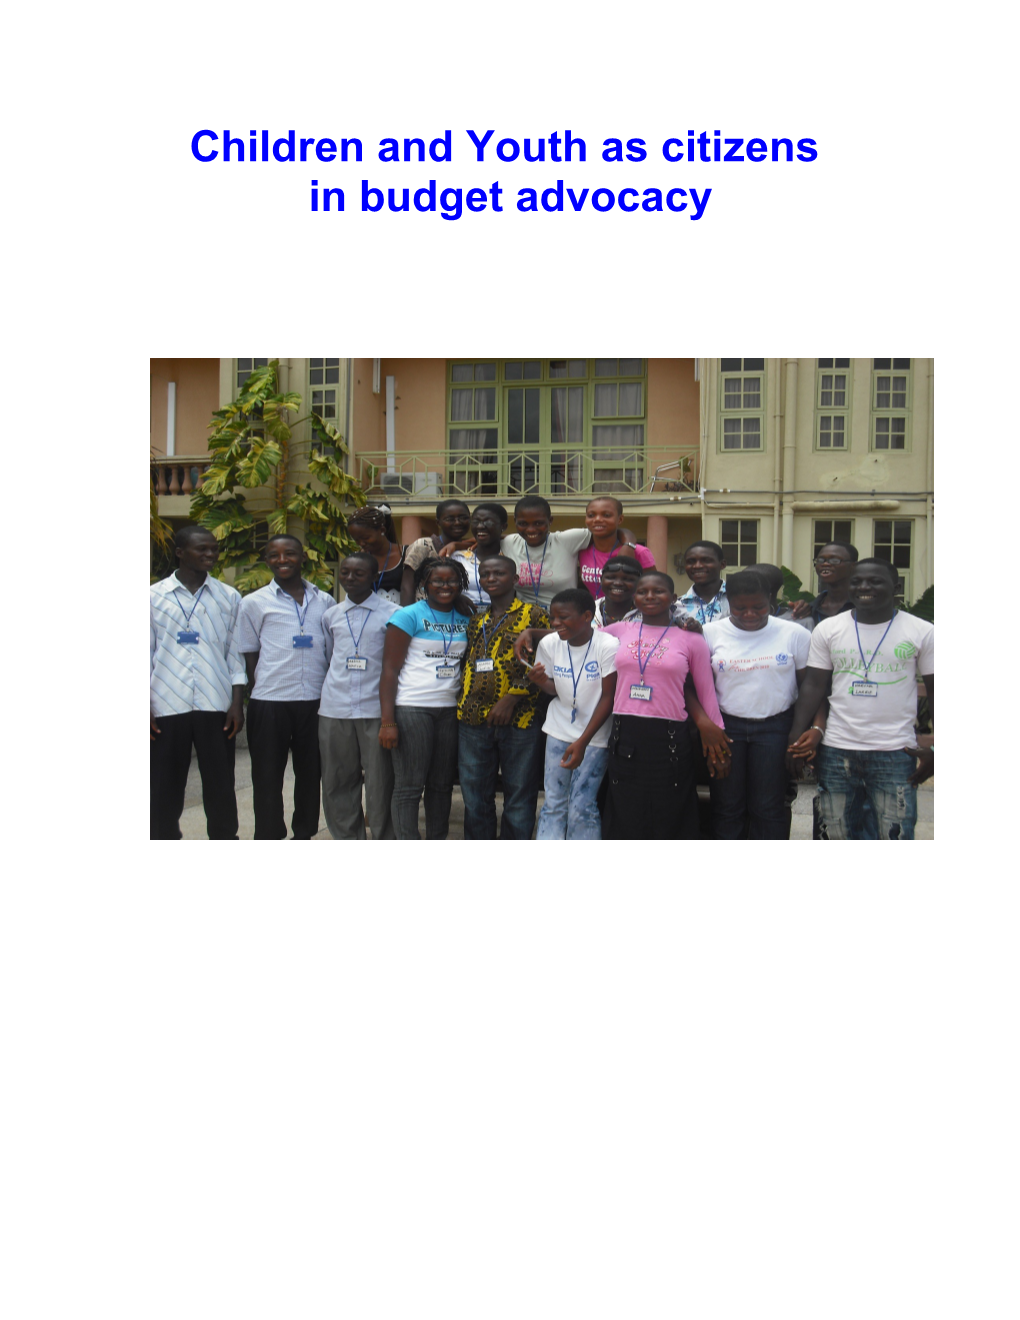 Children and Youth As Citizens in Budget Advocacy